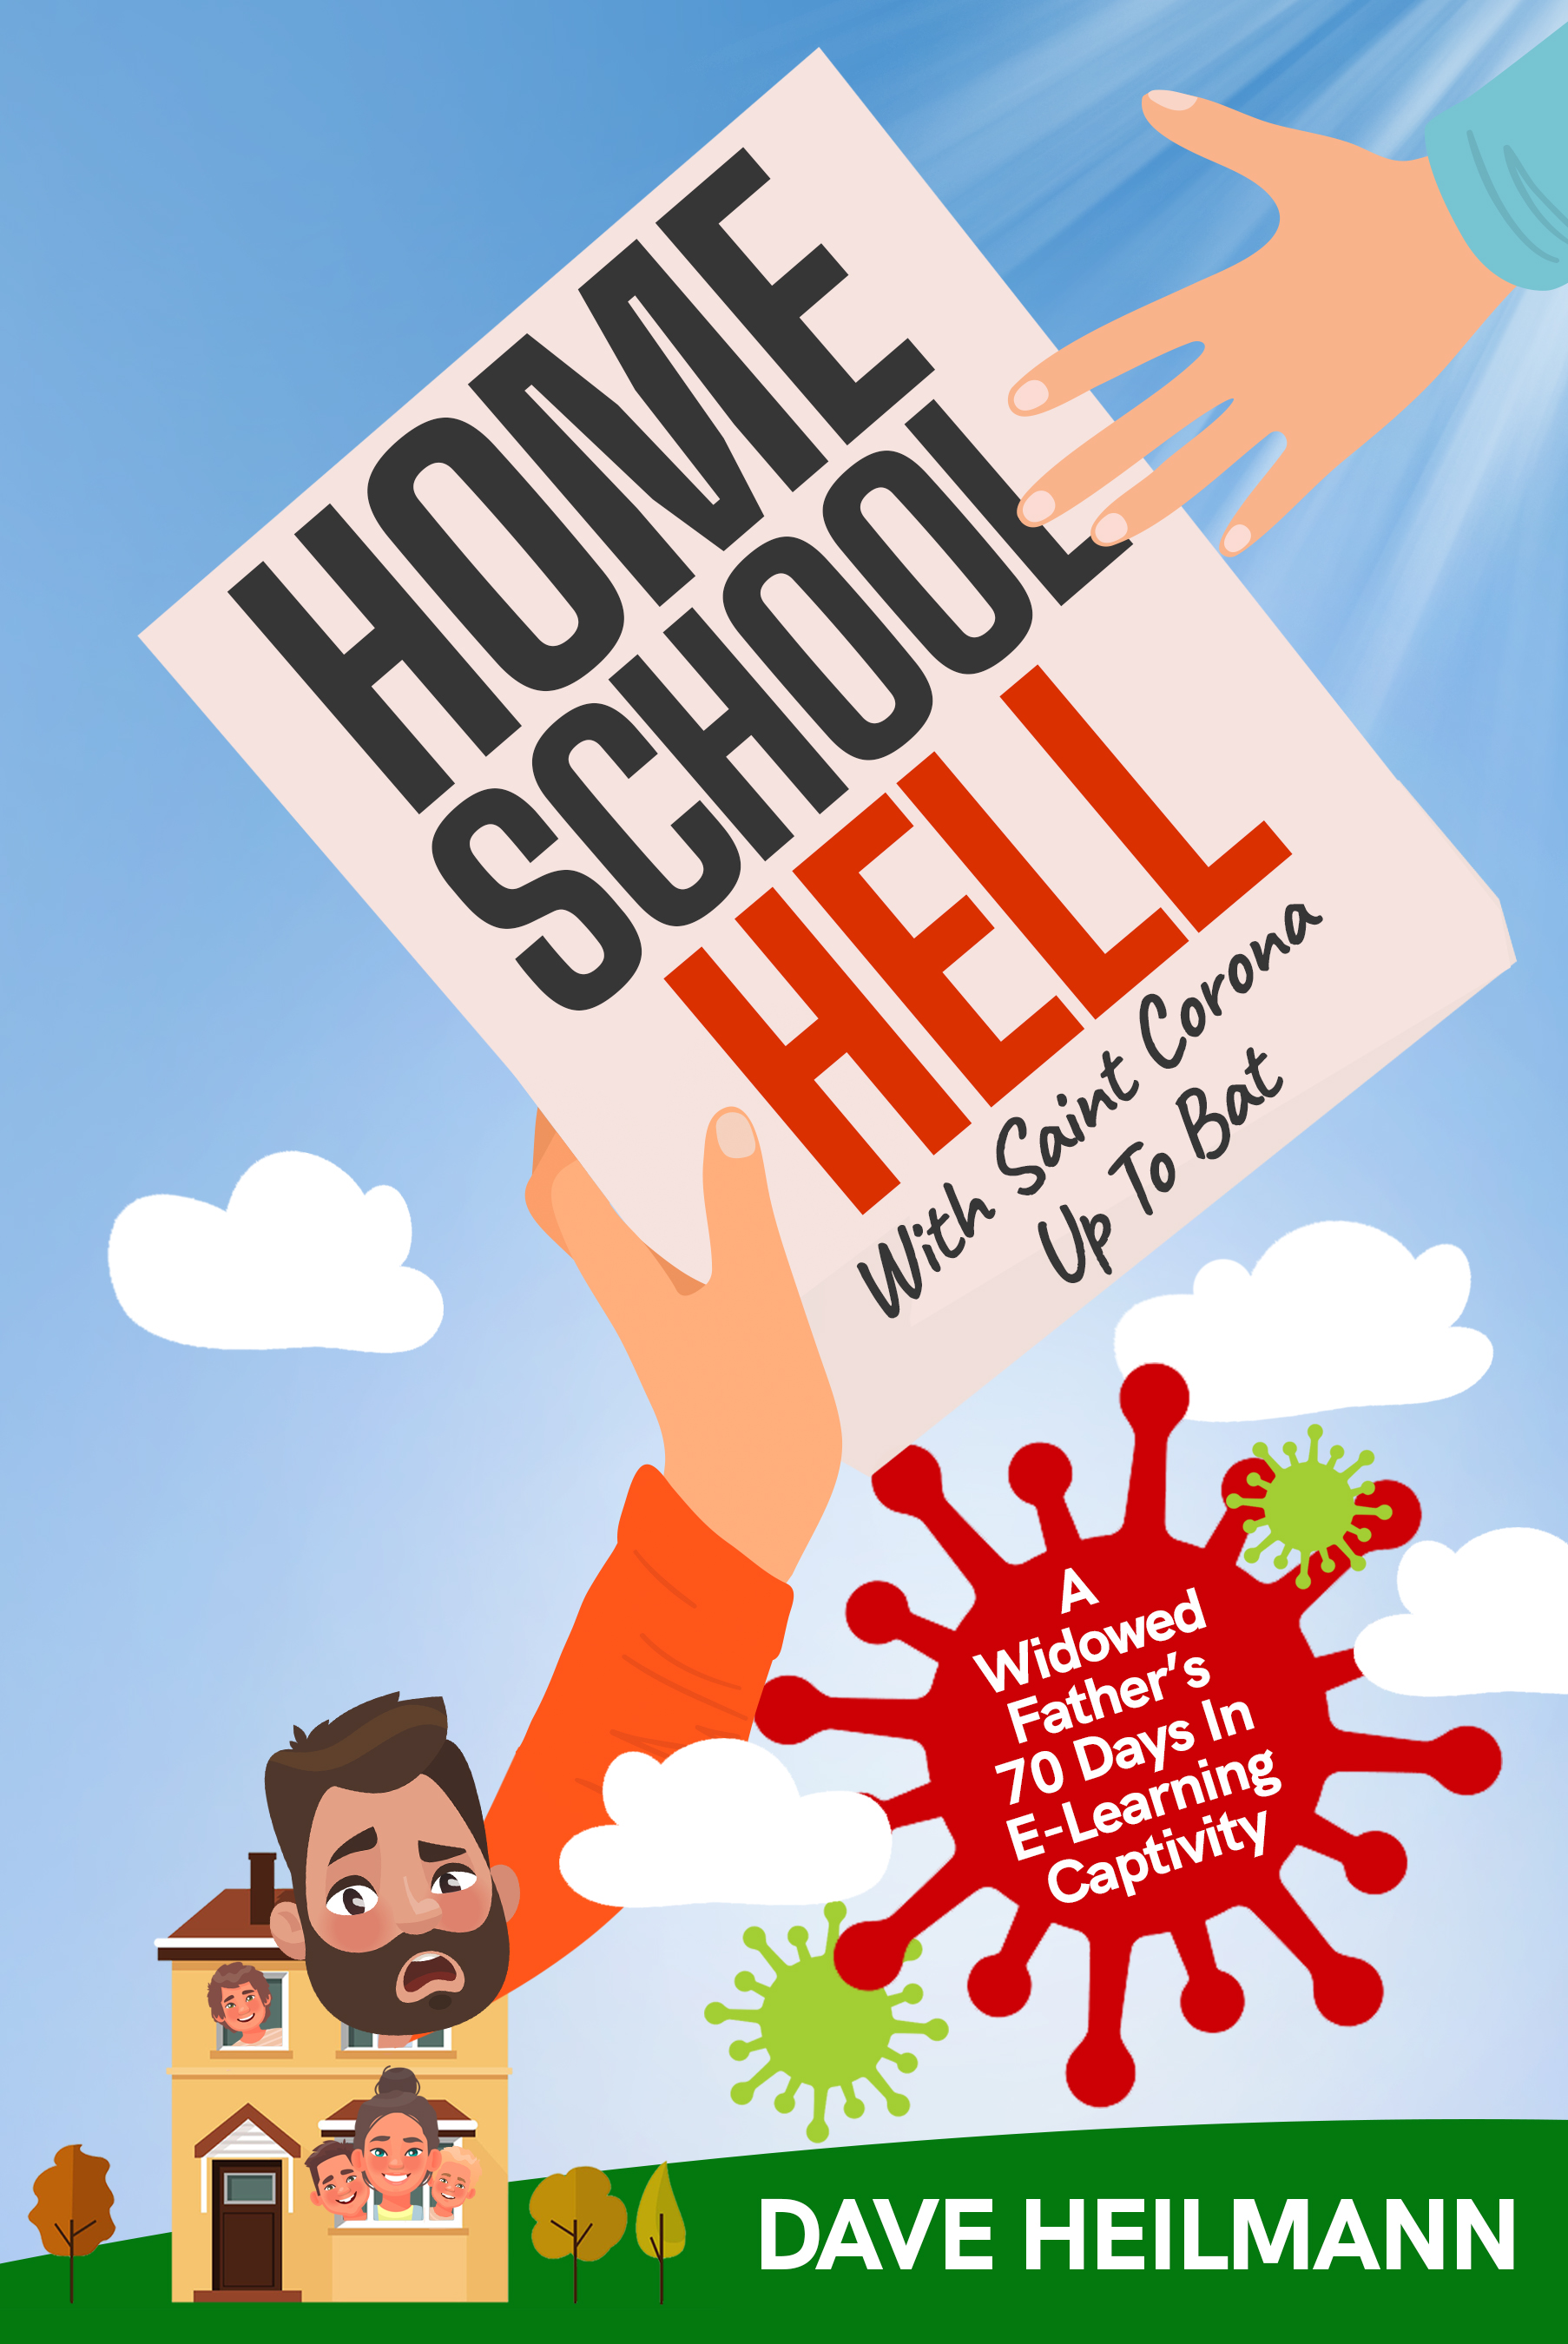 Heilmann’s New Book Home School Hell with Saint Corona Up to Bat is Exactly What Every Parent in this Country Needs Right Now